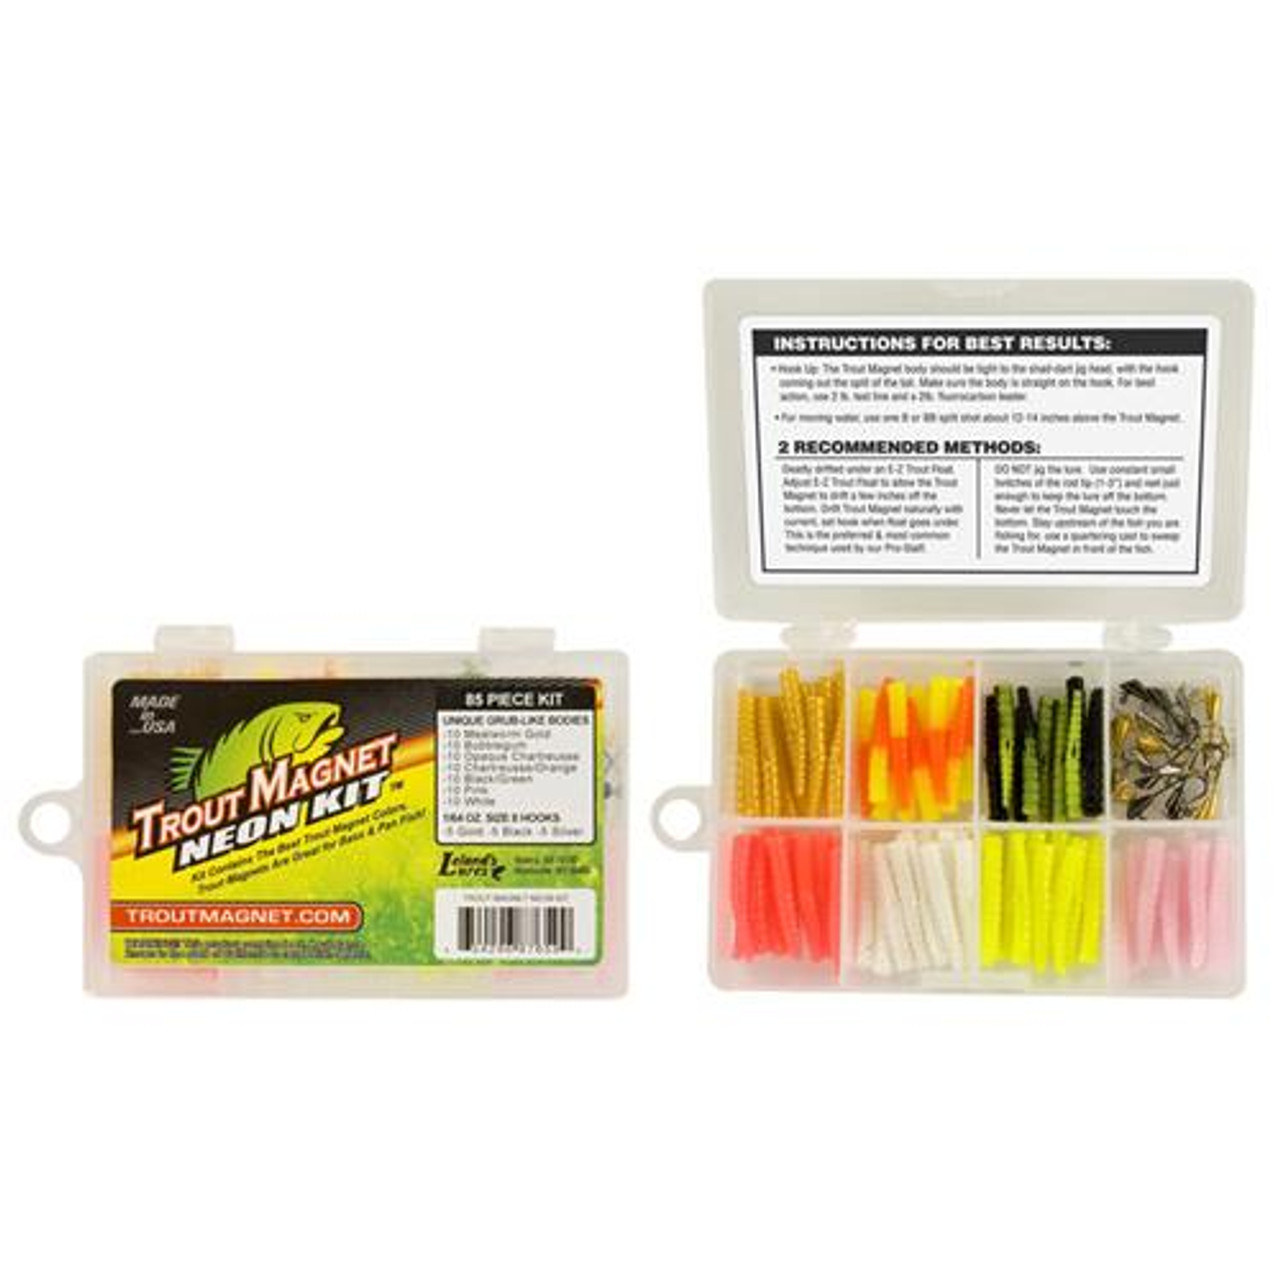 Lelands Lures Trout Magnet Softbait Bugs Small Hellgrammite Multi-Colored